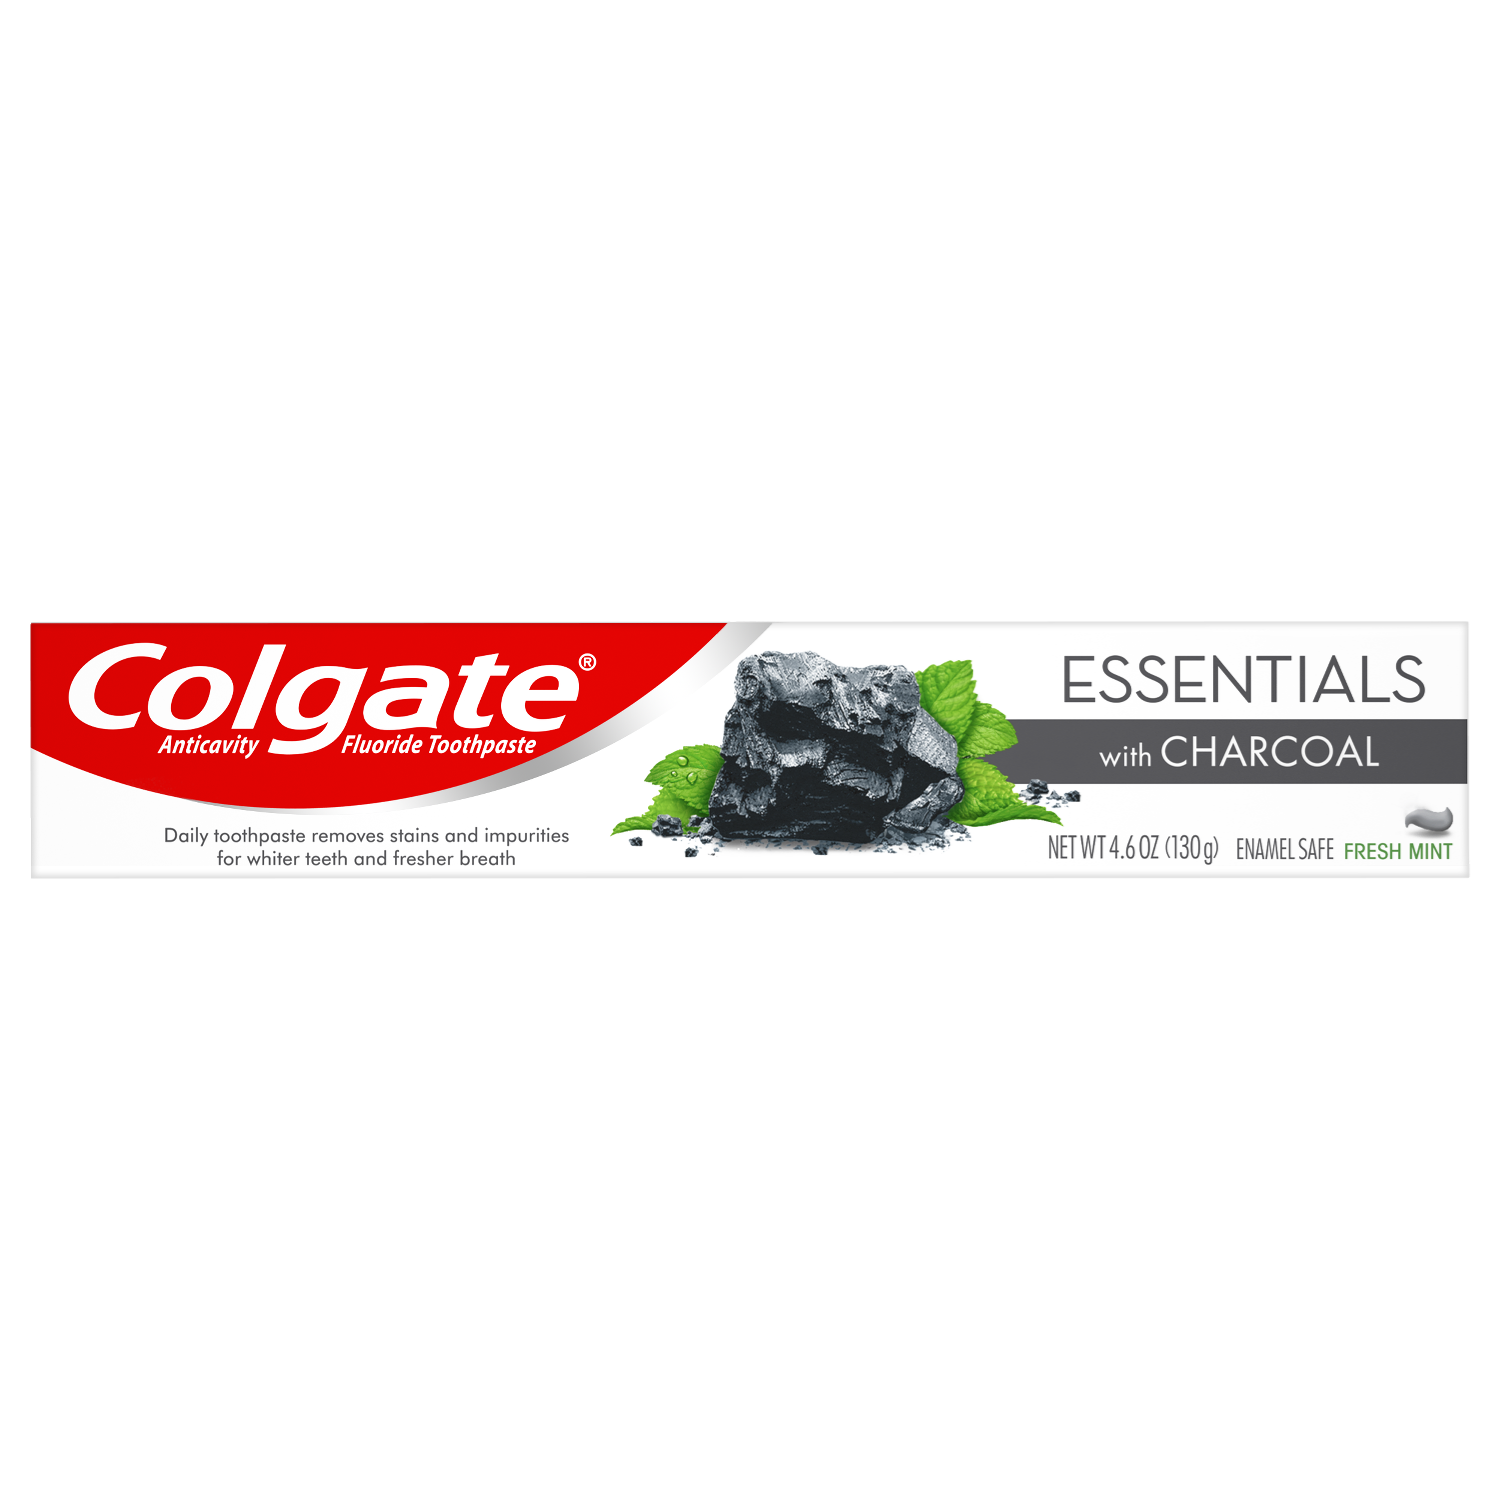 Colgate Charcoal Teeth Whitening Toothpaste, Fresh Mint, 4.6 oz - image 7 of 9